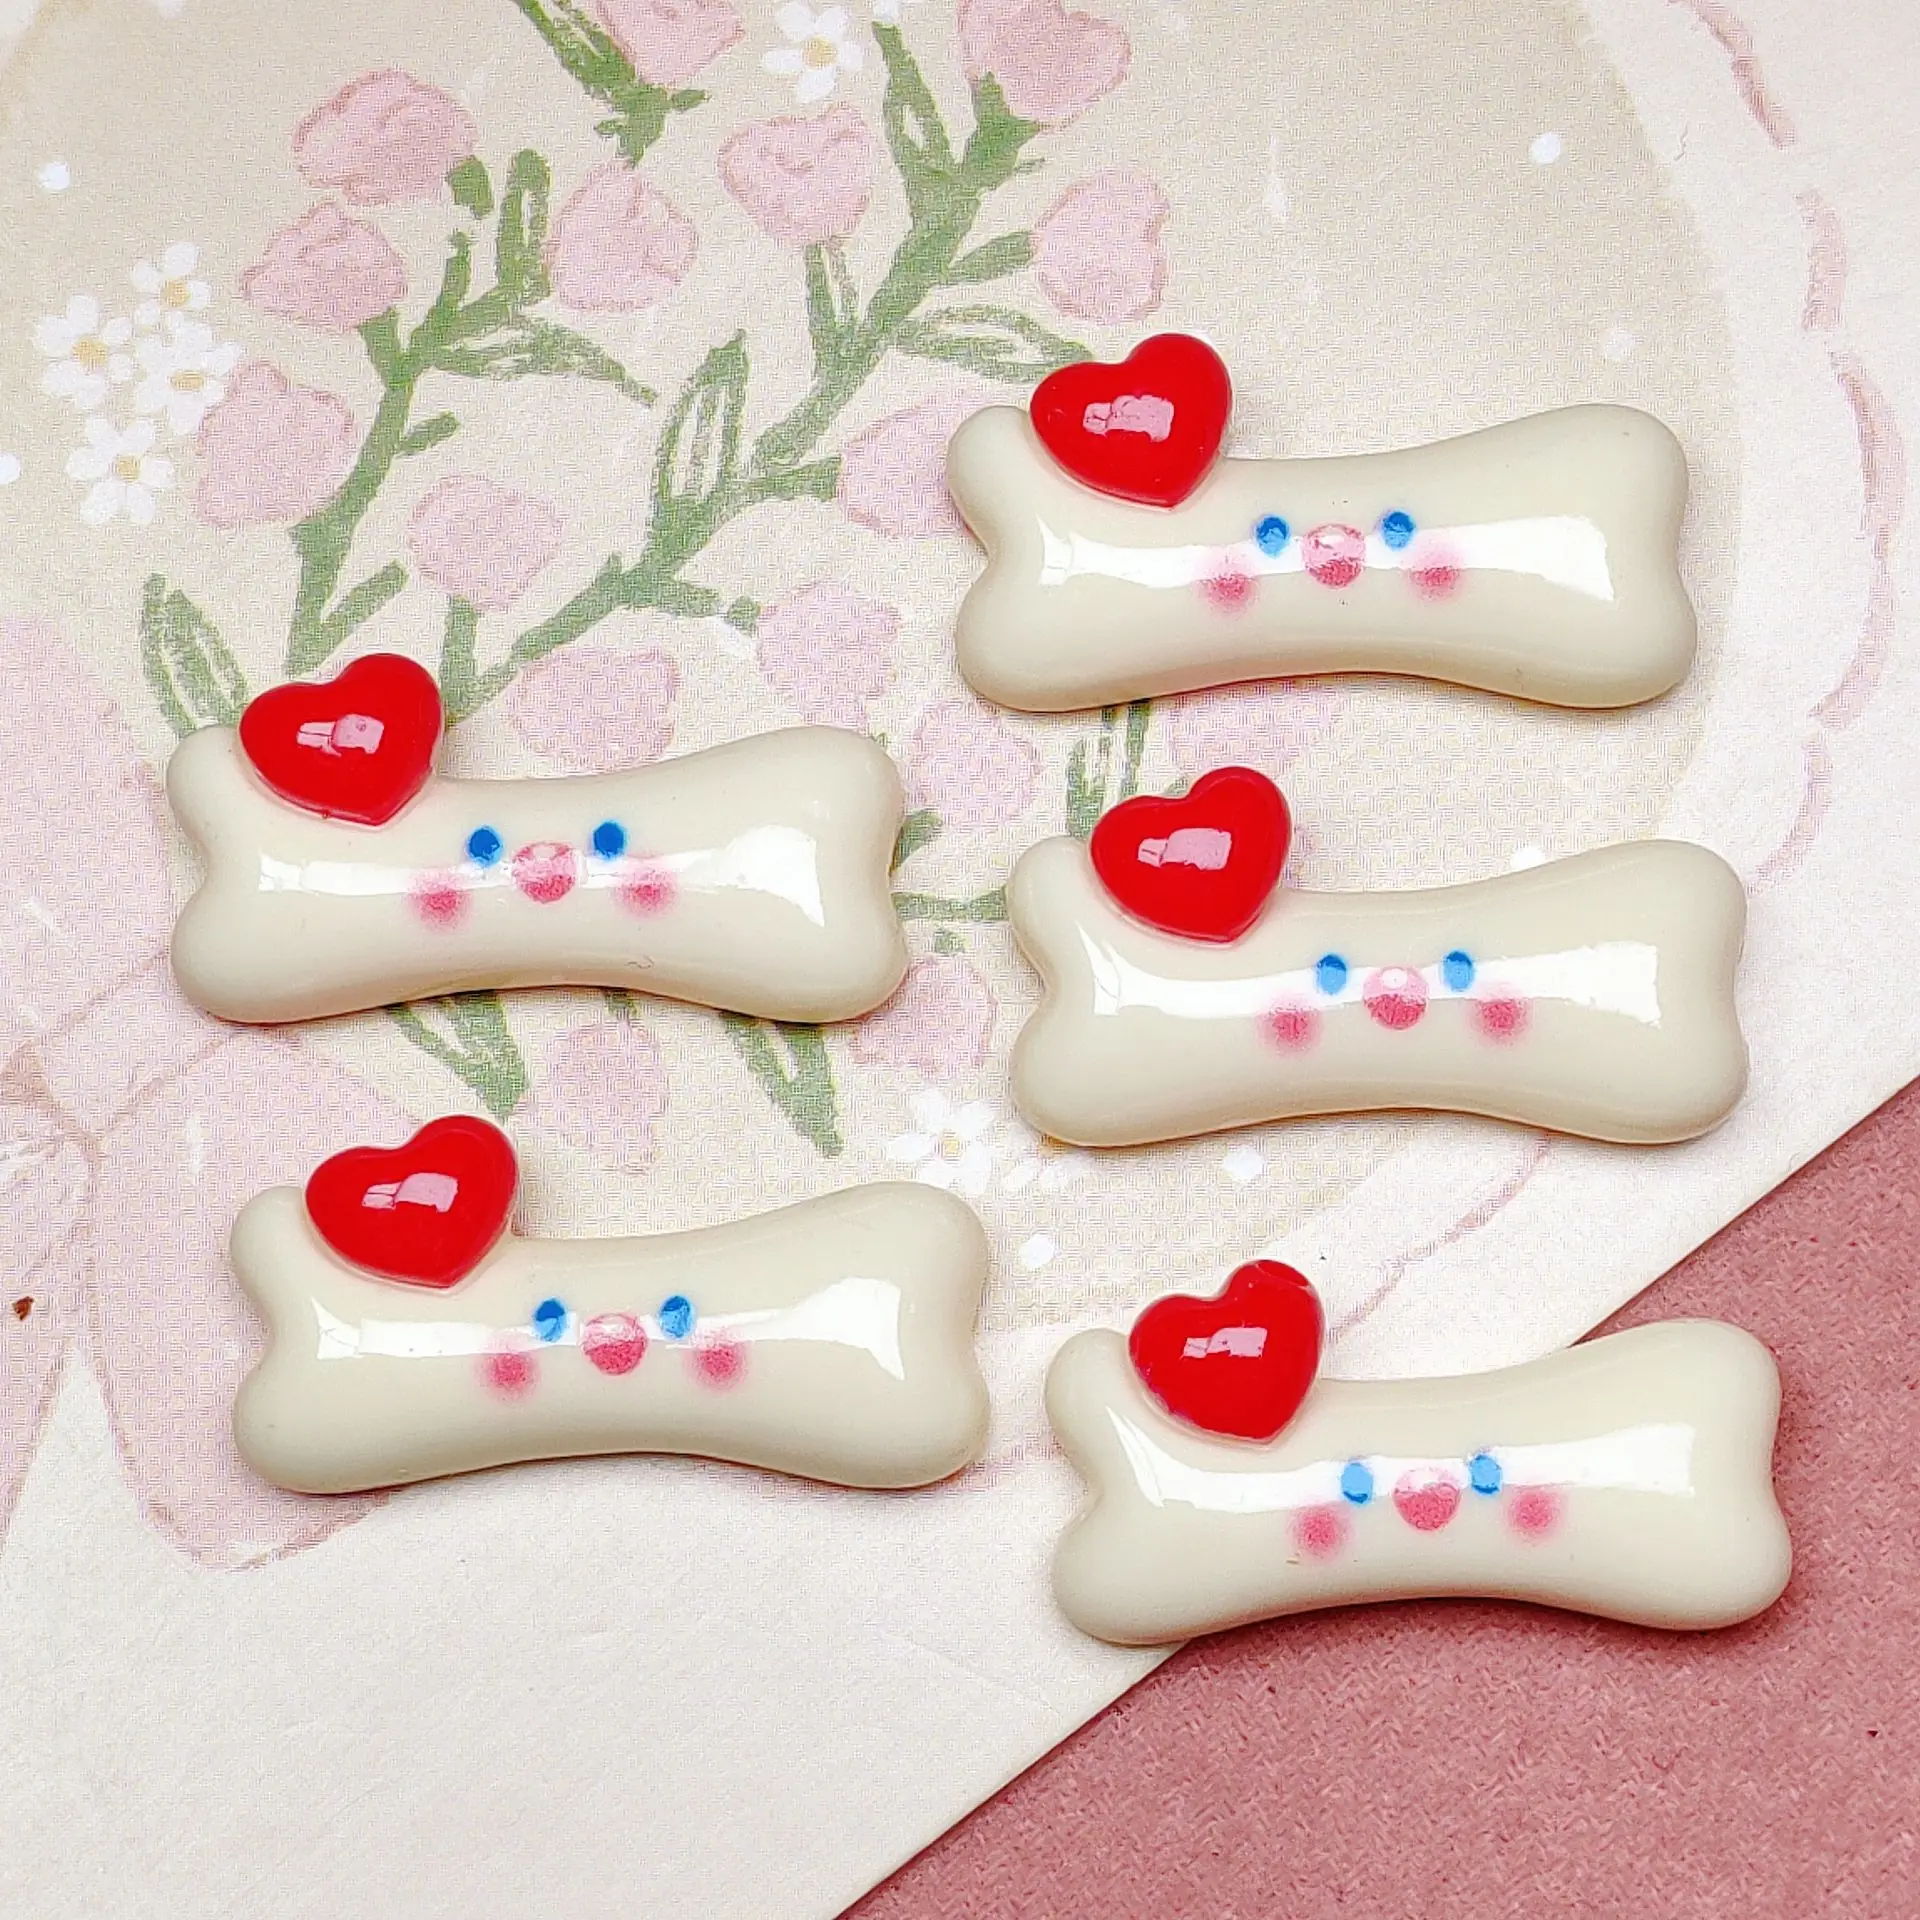 

10 Pcs New Cute Bright Face, Love, Smiling Face, Dog Bone DIY Fit Phone Deco Parts Embellishments For Hair Bows 009